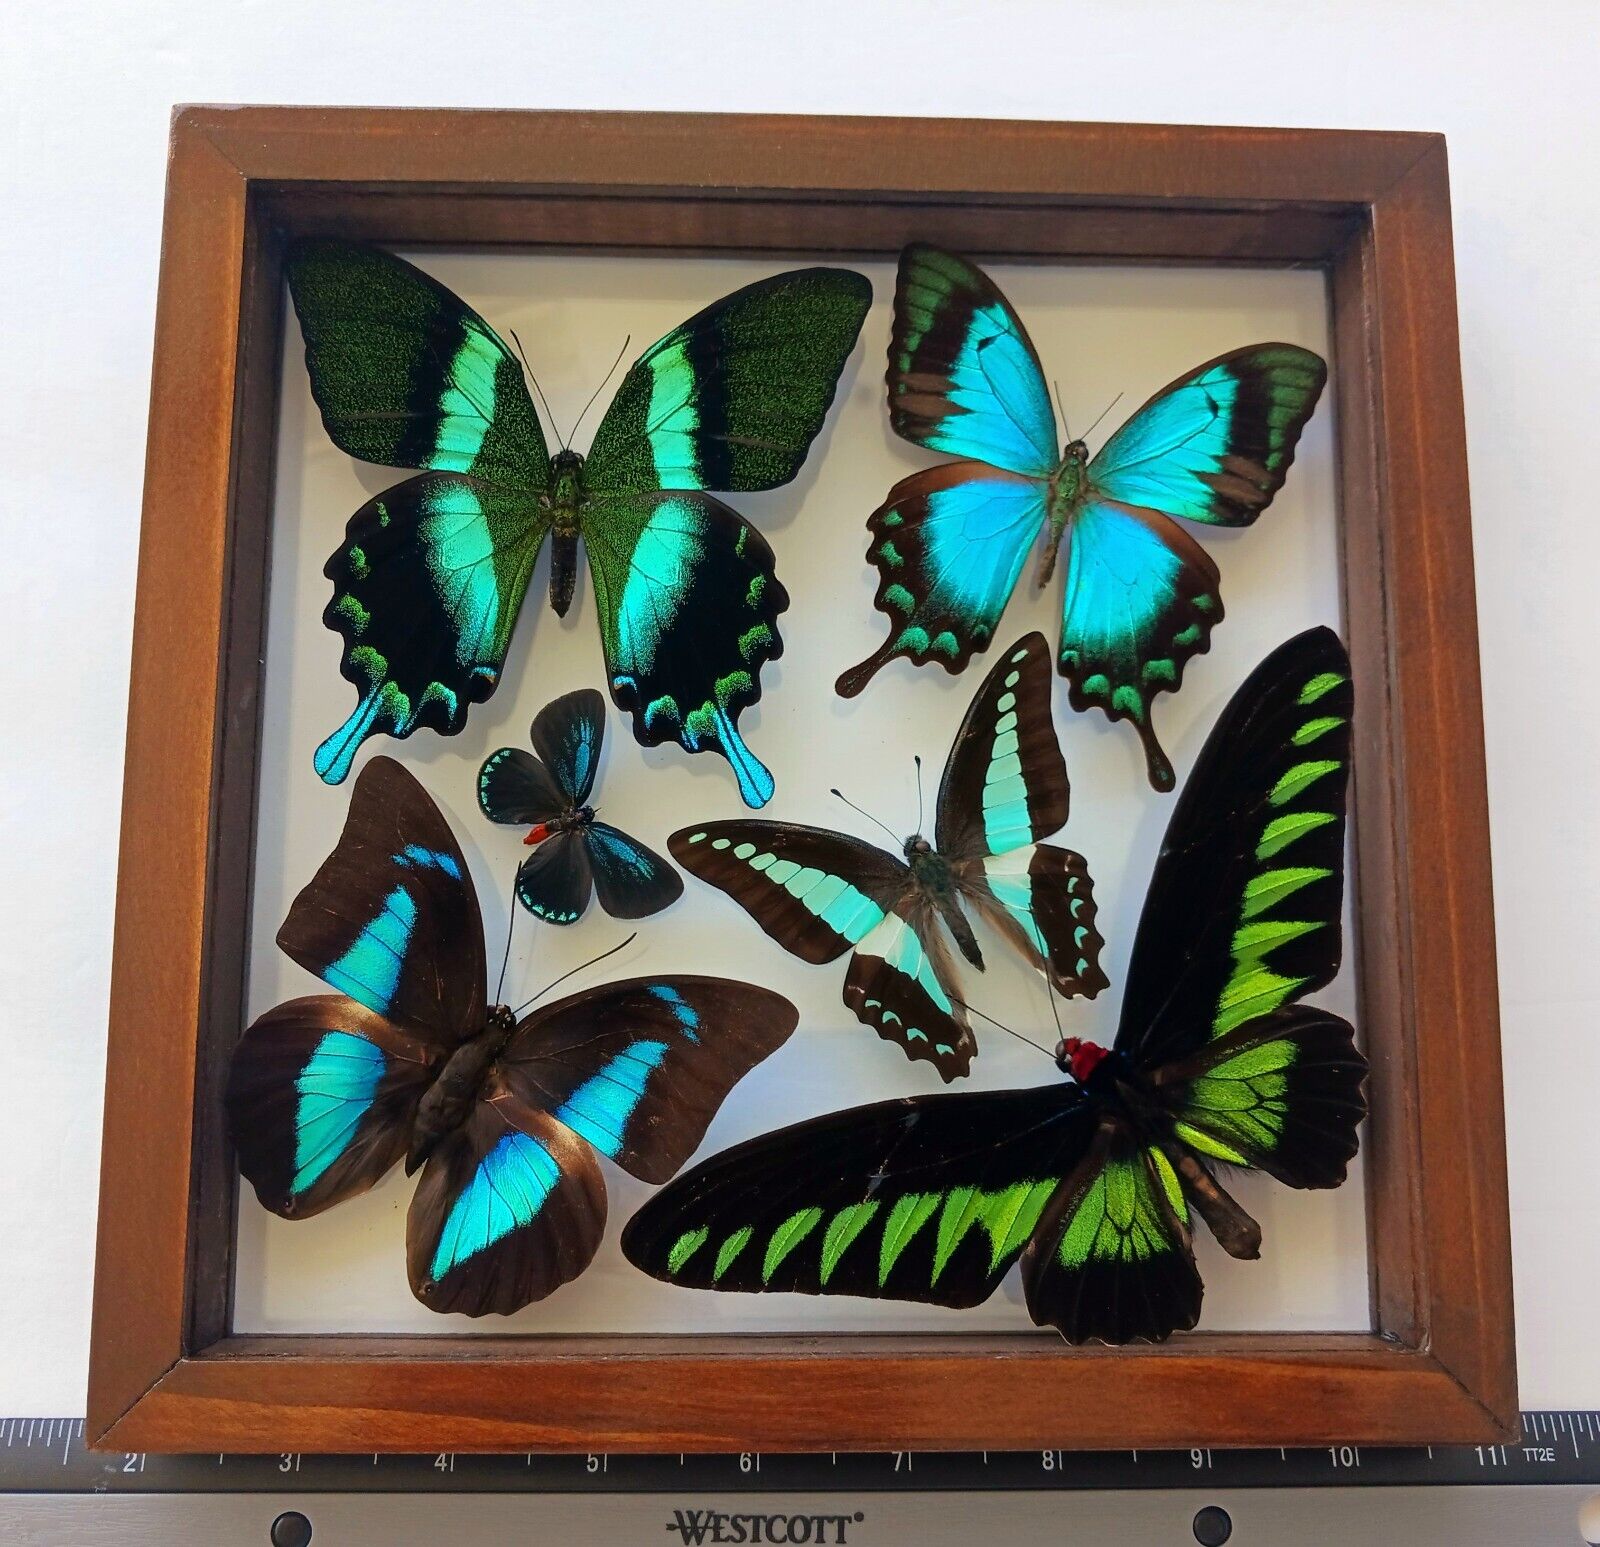 6 REAL BUTTERFLIES AMAZING COLORS MOUNTED WOOD DOUBLE GLASS 8.5